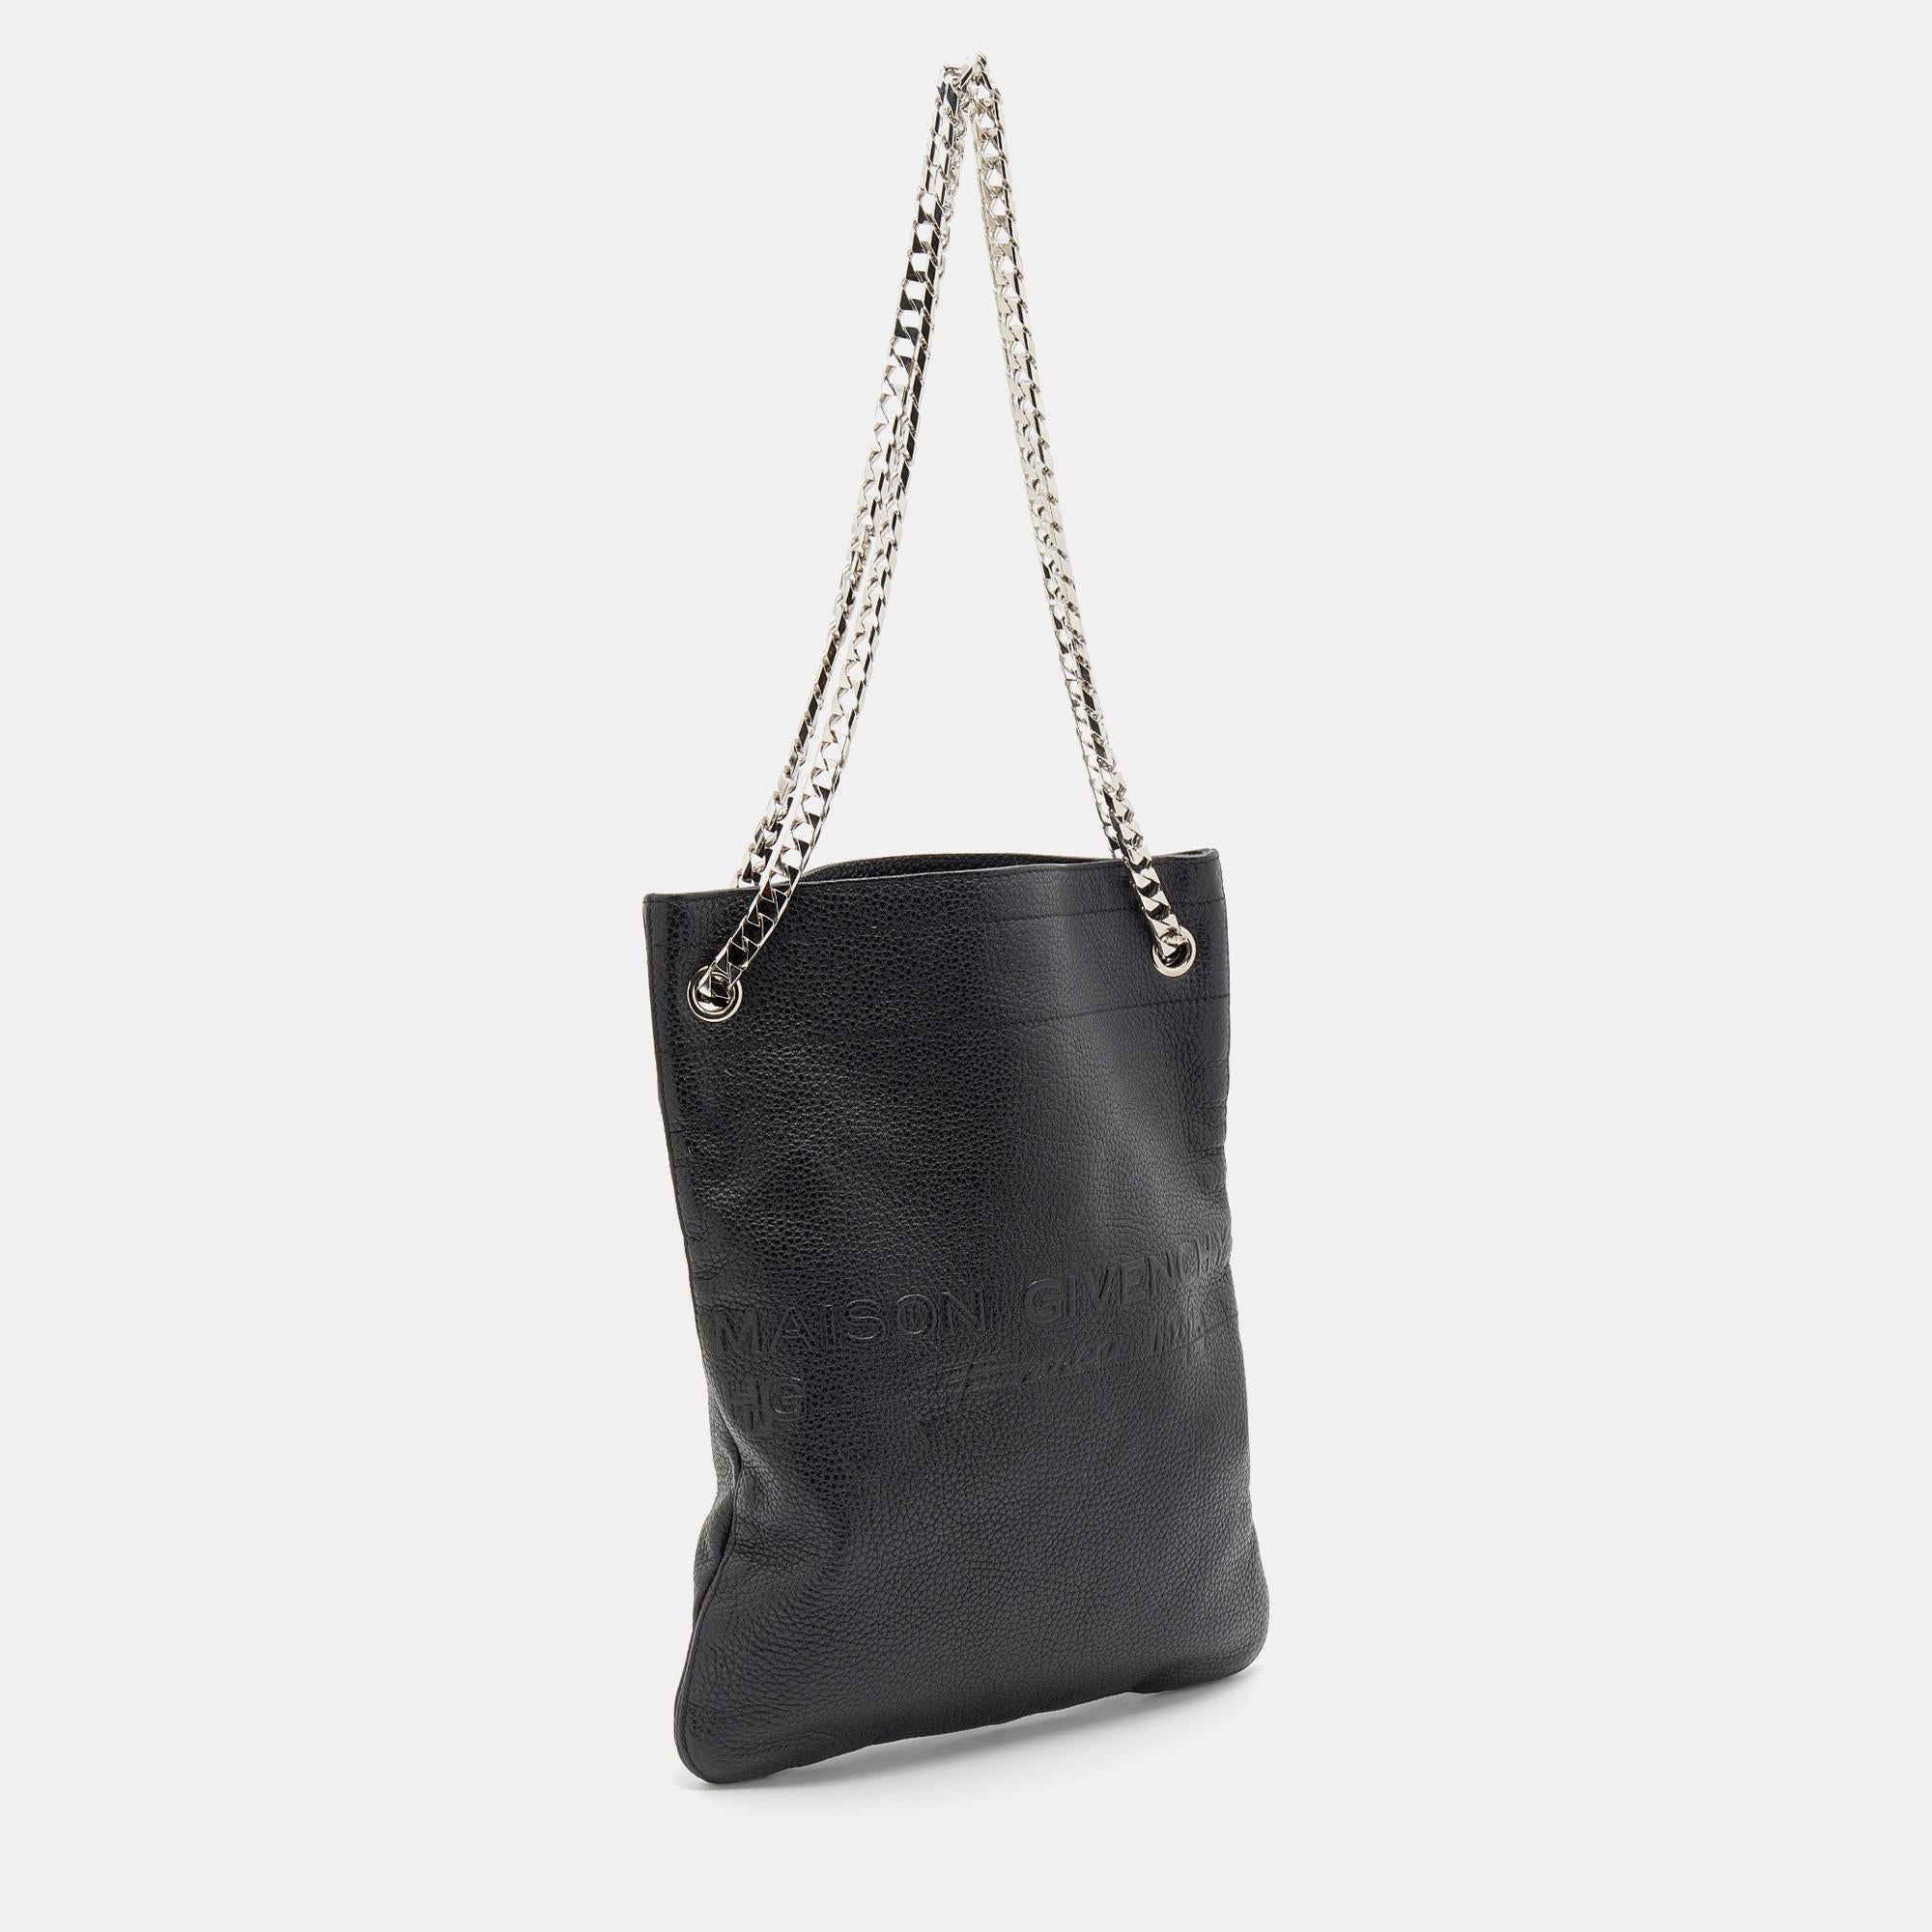 Women's Givenchy Black Leather HDG Tote